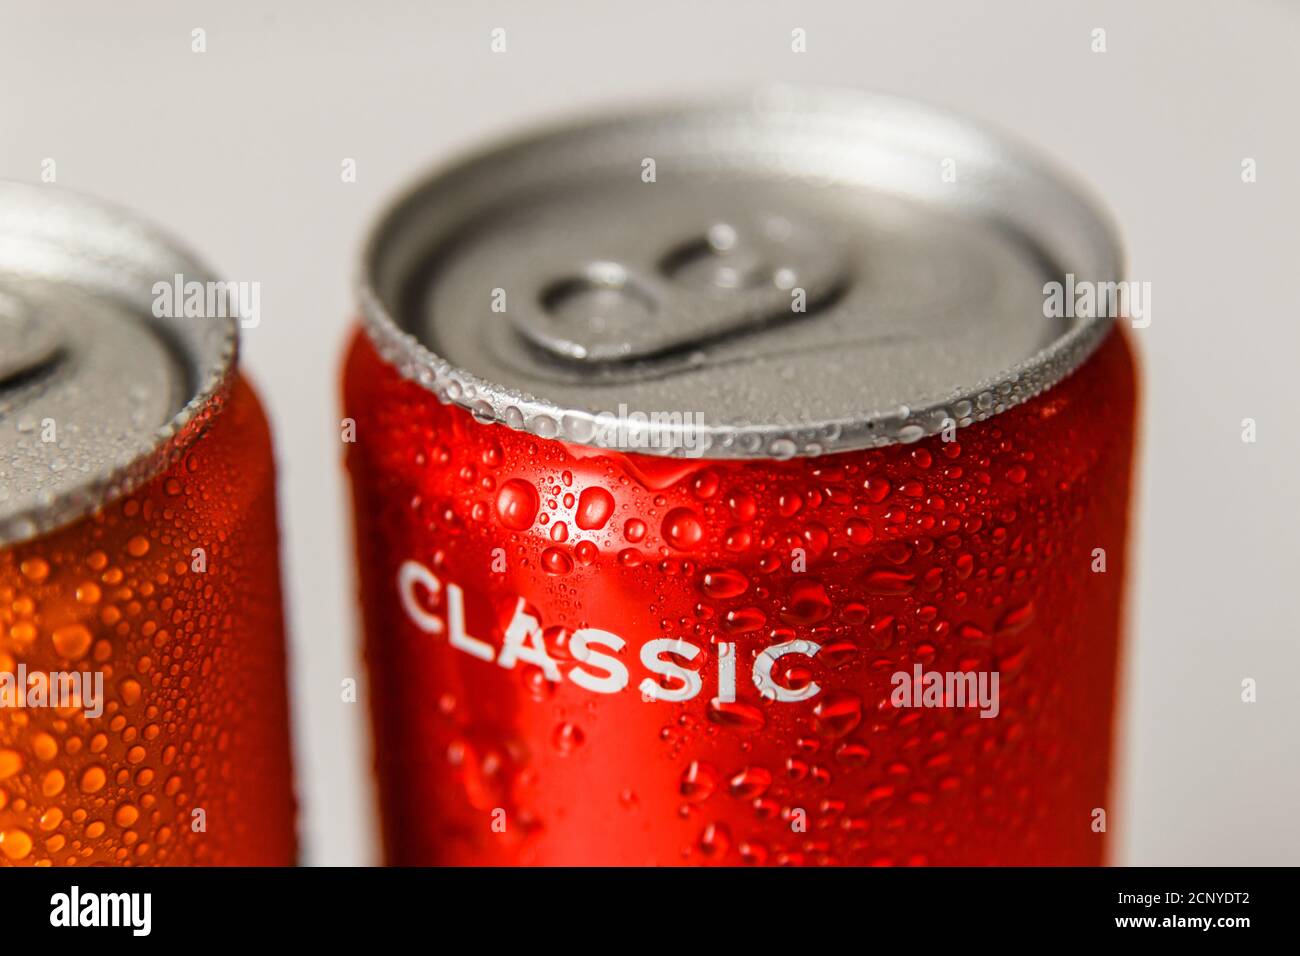 Download Coca Cola Can Condensation High Resolution Stock Photography And Images Alamy Yellowimages Mockups